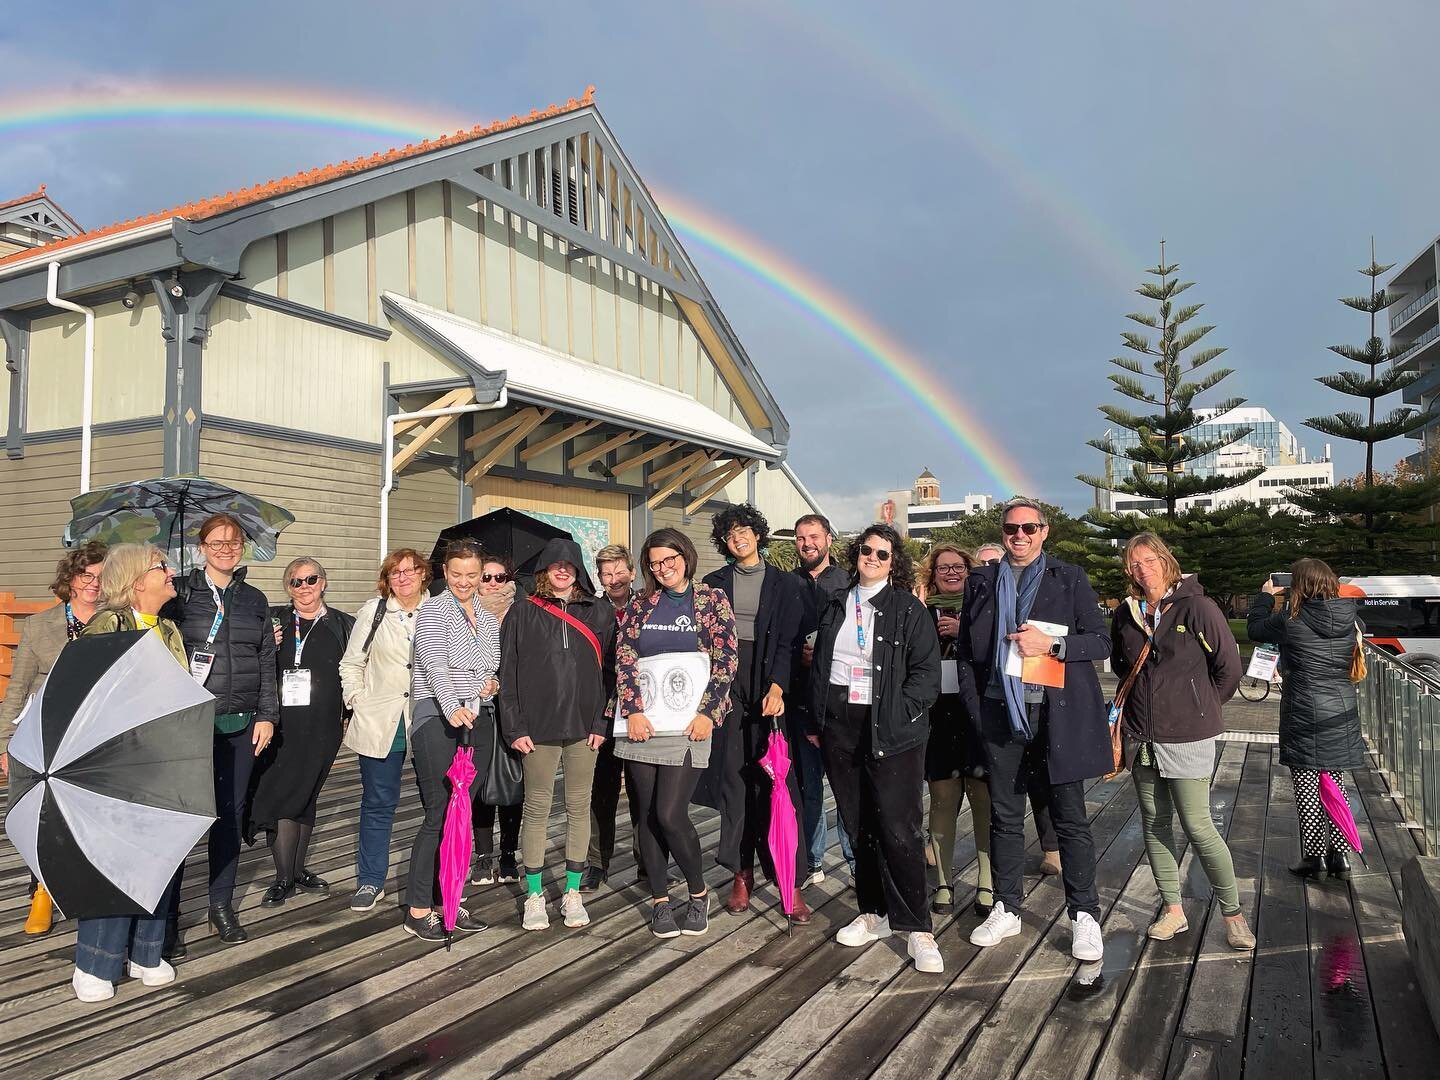 Our tour with delegates from the Australian Museums and Galleries Association conference couldn&rsquo;t have been more fun! 

Met so many interesting professionals, and we finished with a double rainbow! 🌈🌈

Extra special thanks to our local mate, 